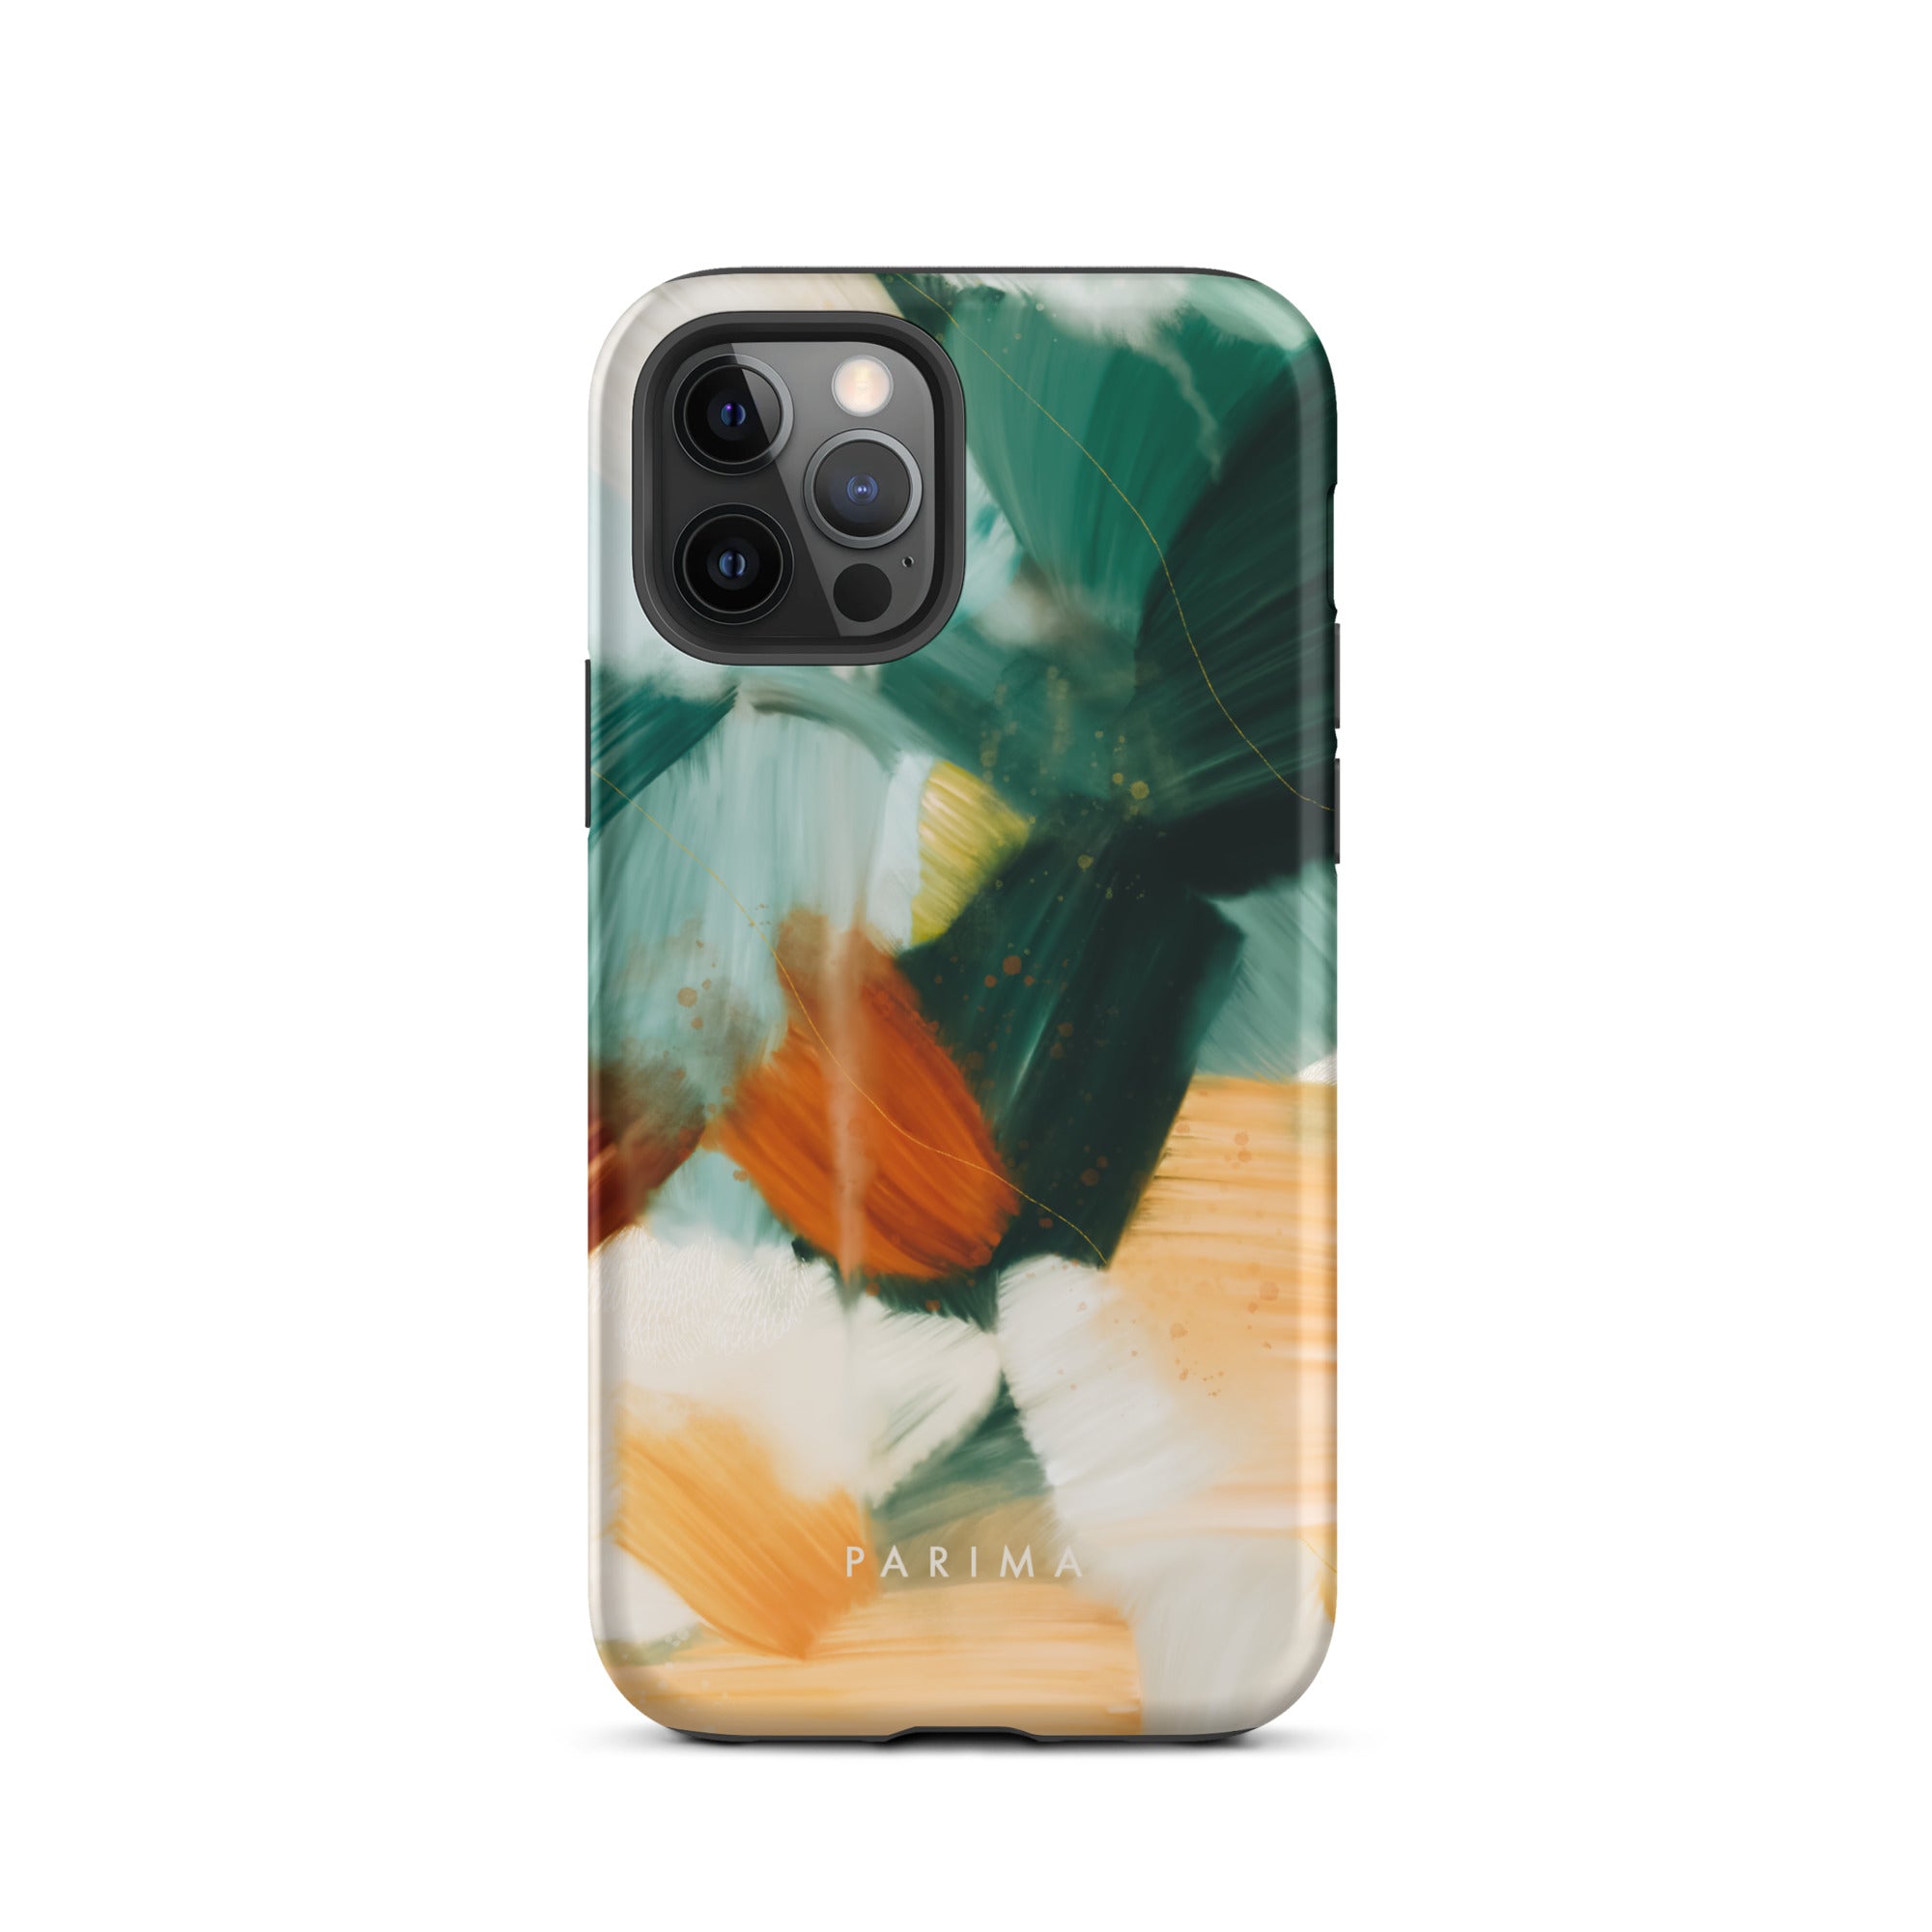 Meridian, green and orange abstract art on iPhone 12 Pro tough case by Parima Studio